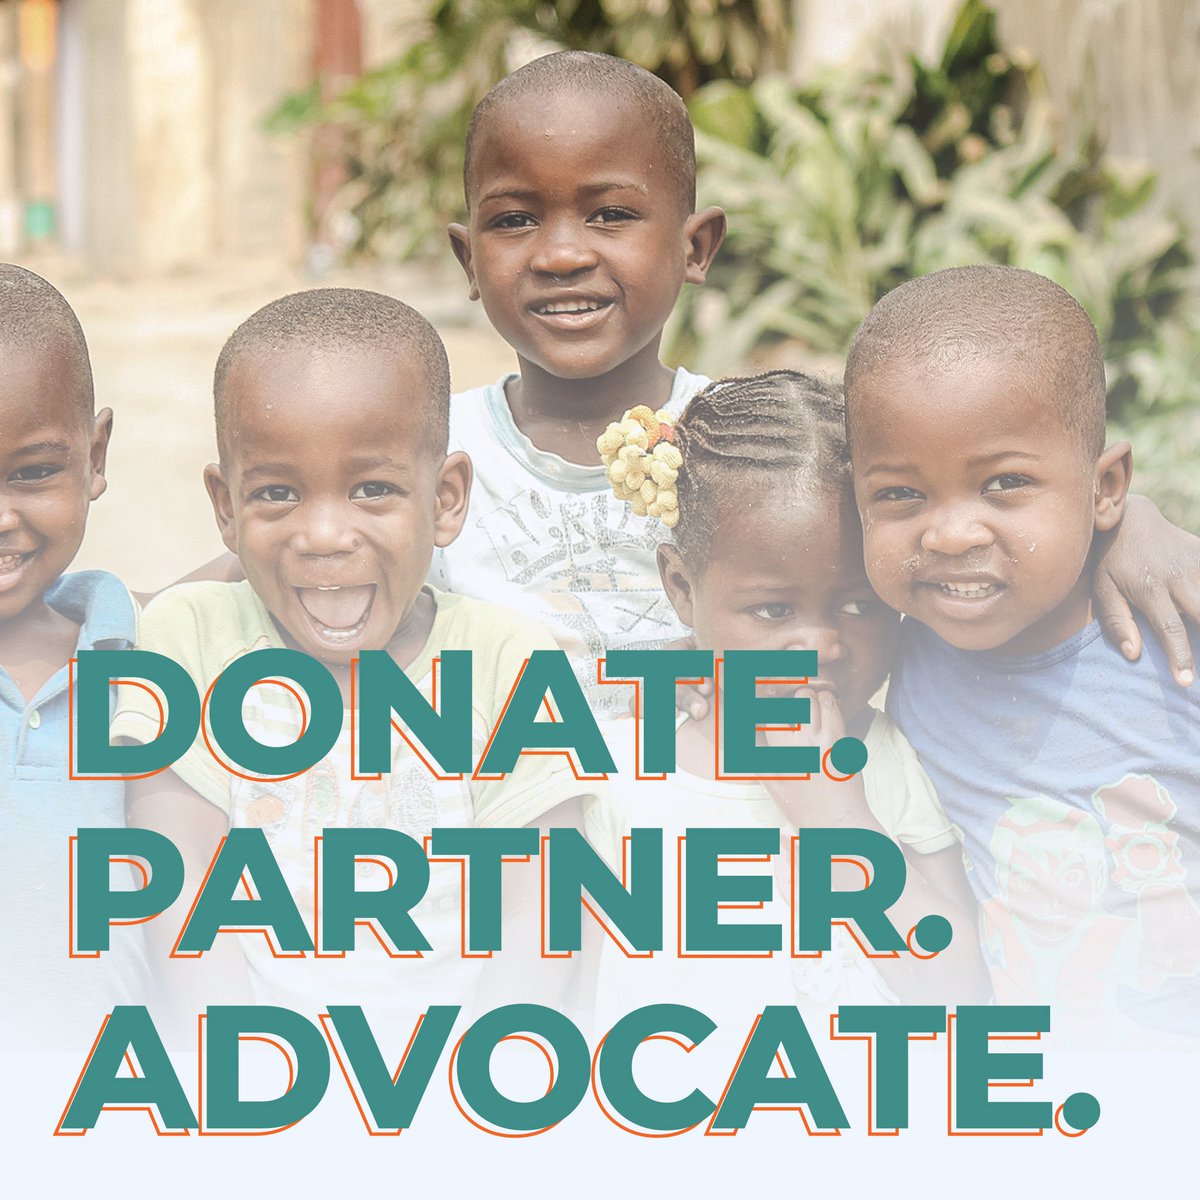 Donate, Partner, Advocate: Please join us today and support this mission to end pain and loneliness for millions of institutionalized children and give them a start to a hopeful future in the arms of a family.